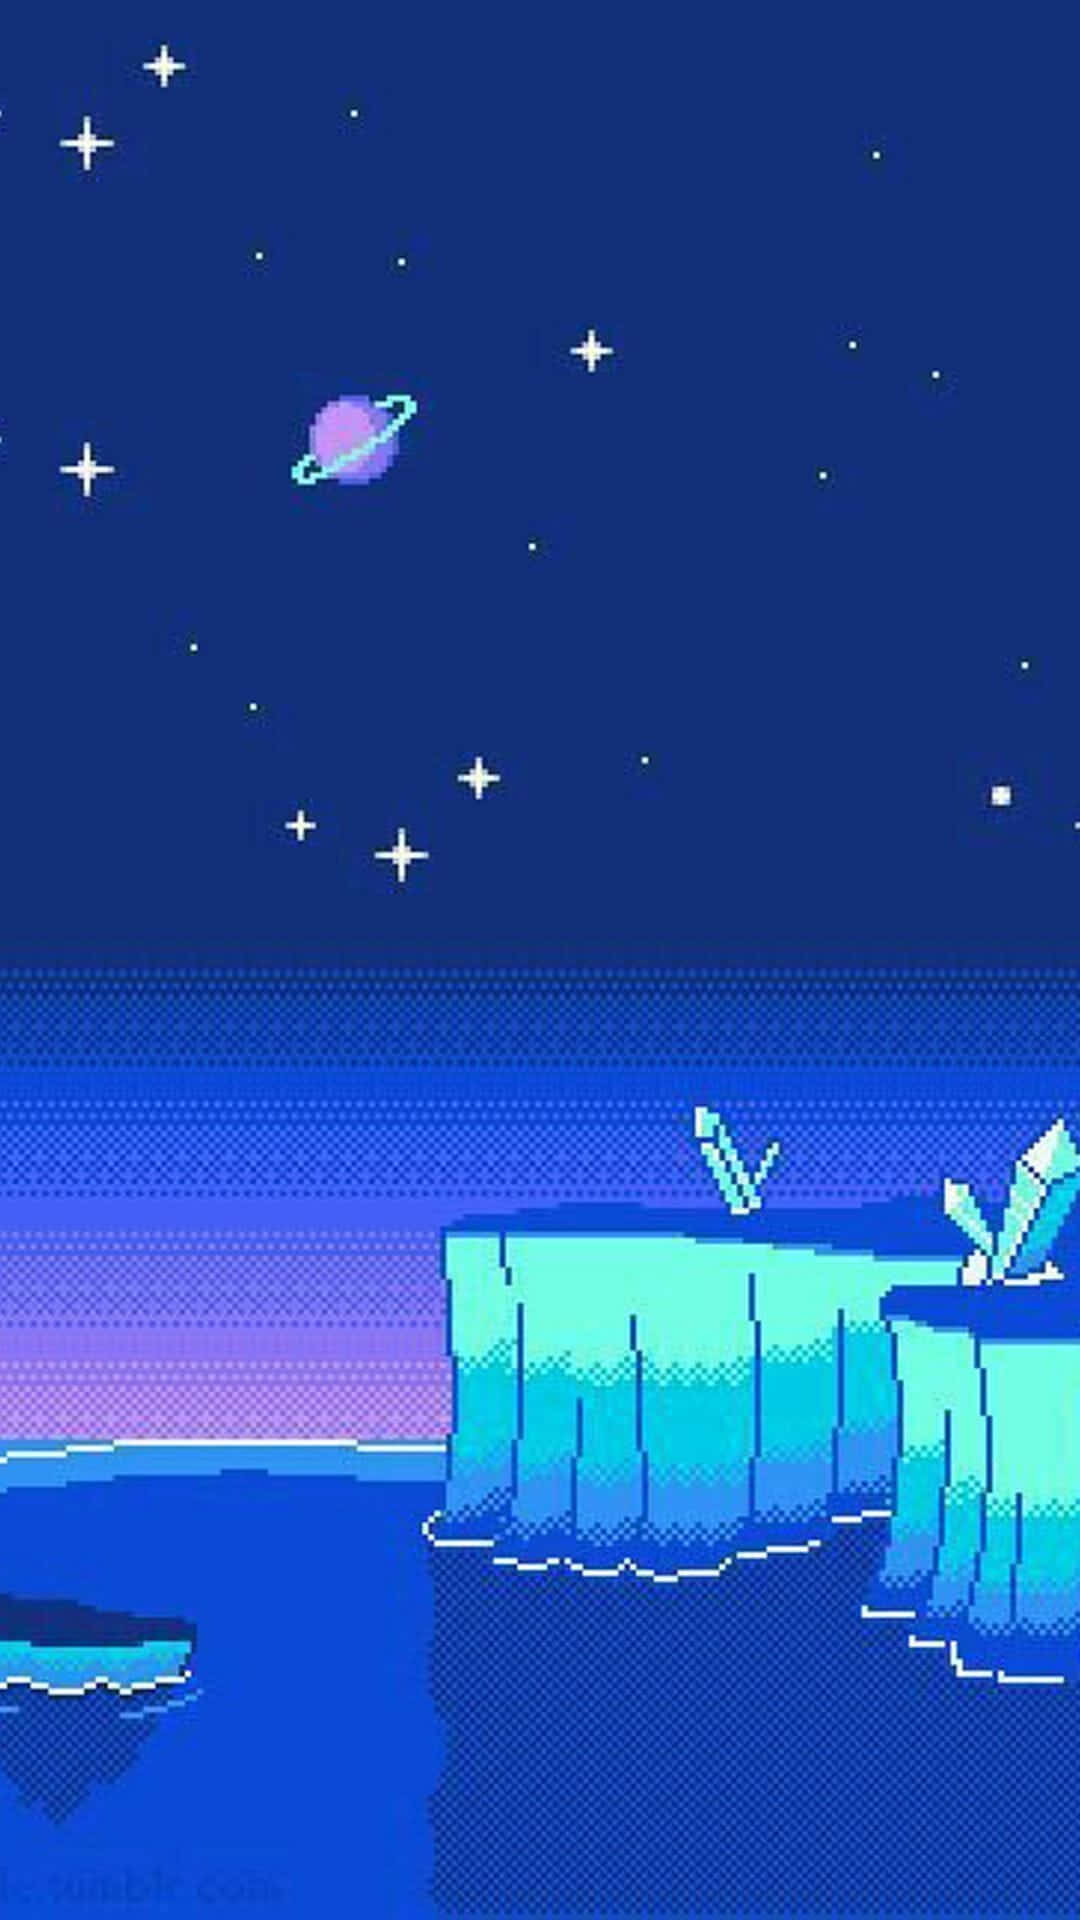 A Pixel Art Image Of A Rocky Island With A Moon And Stars Wallpaper